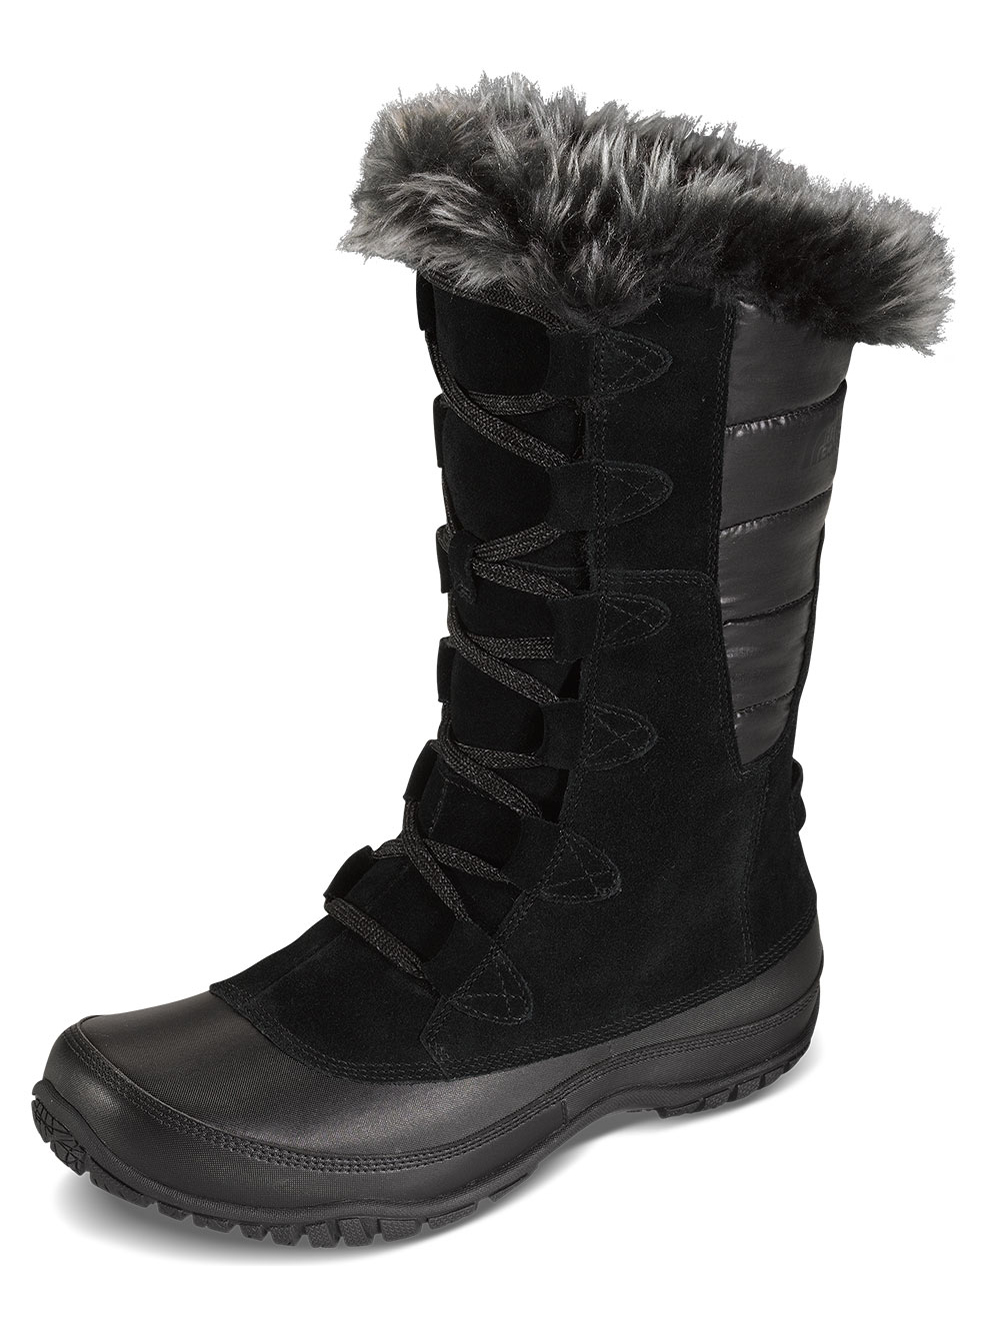 north face boots ladies